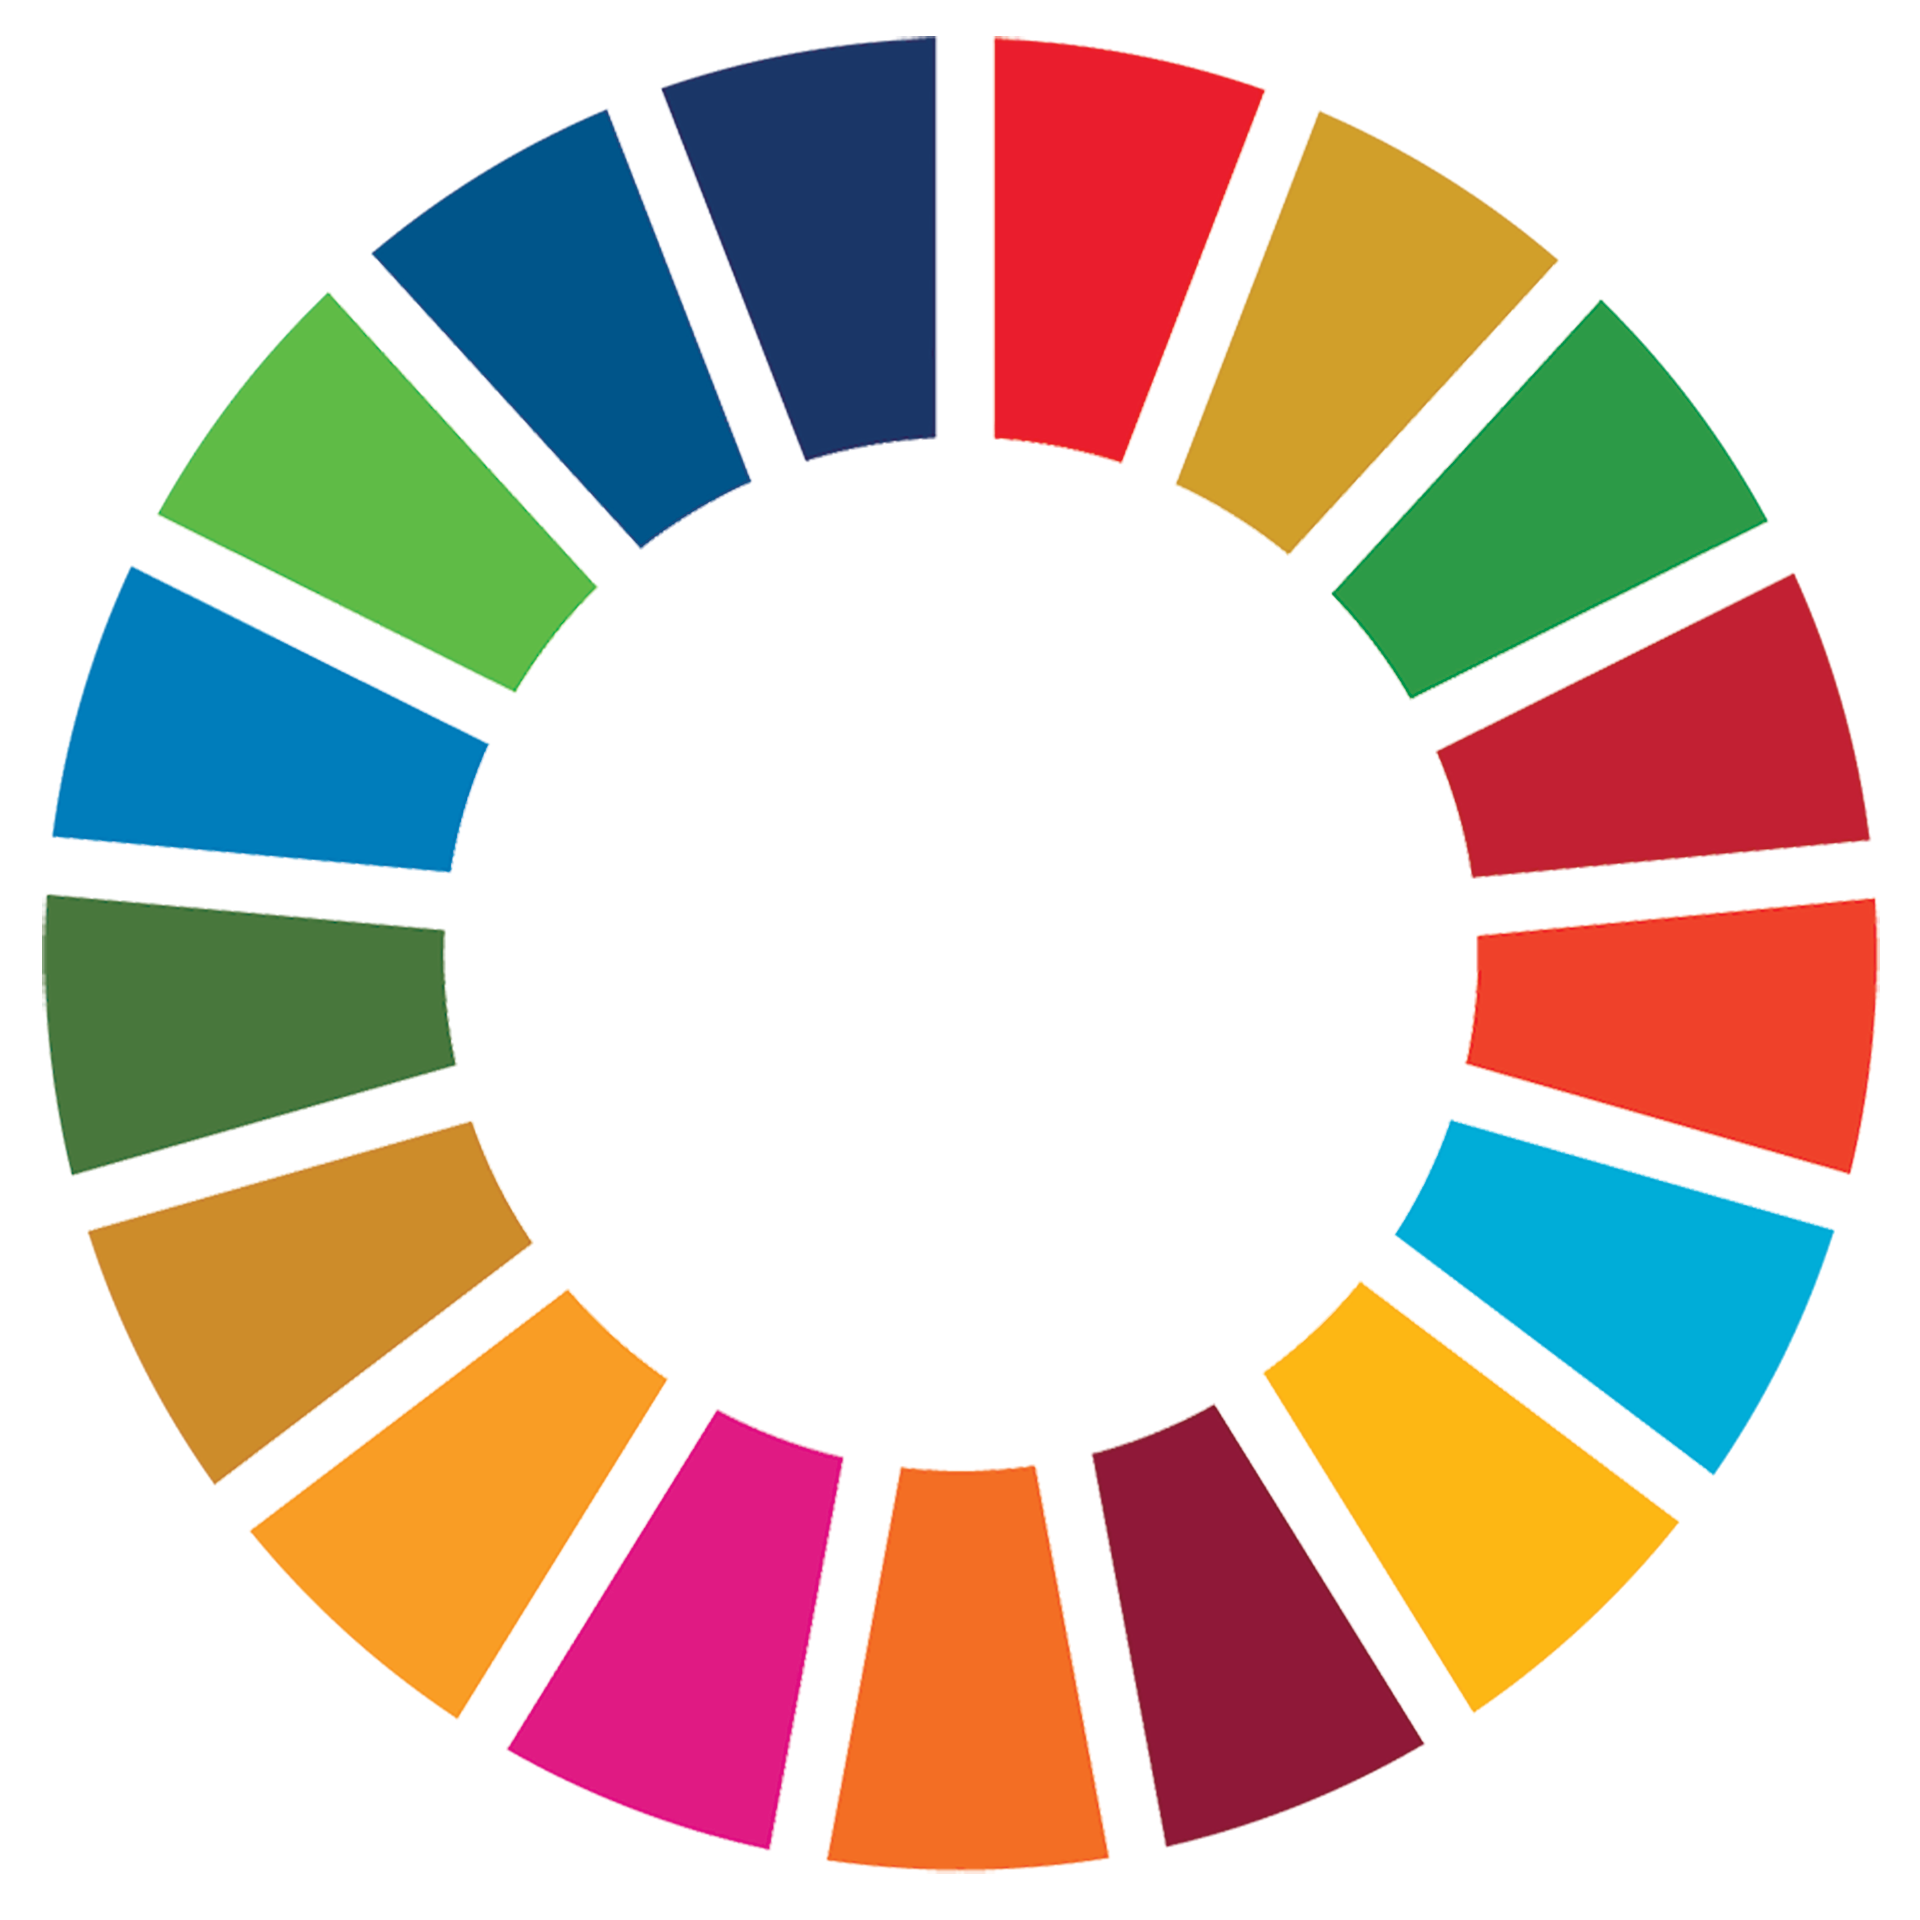 the colour wheel logo of the United Nations 17 Sustainable Development Goals